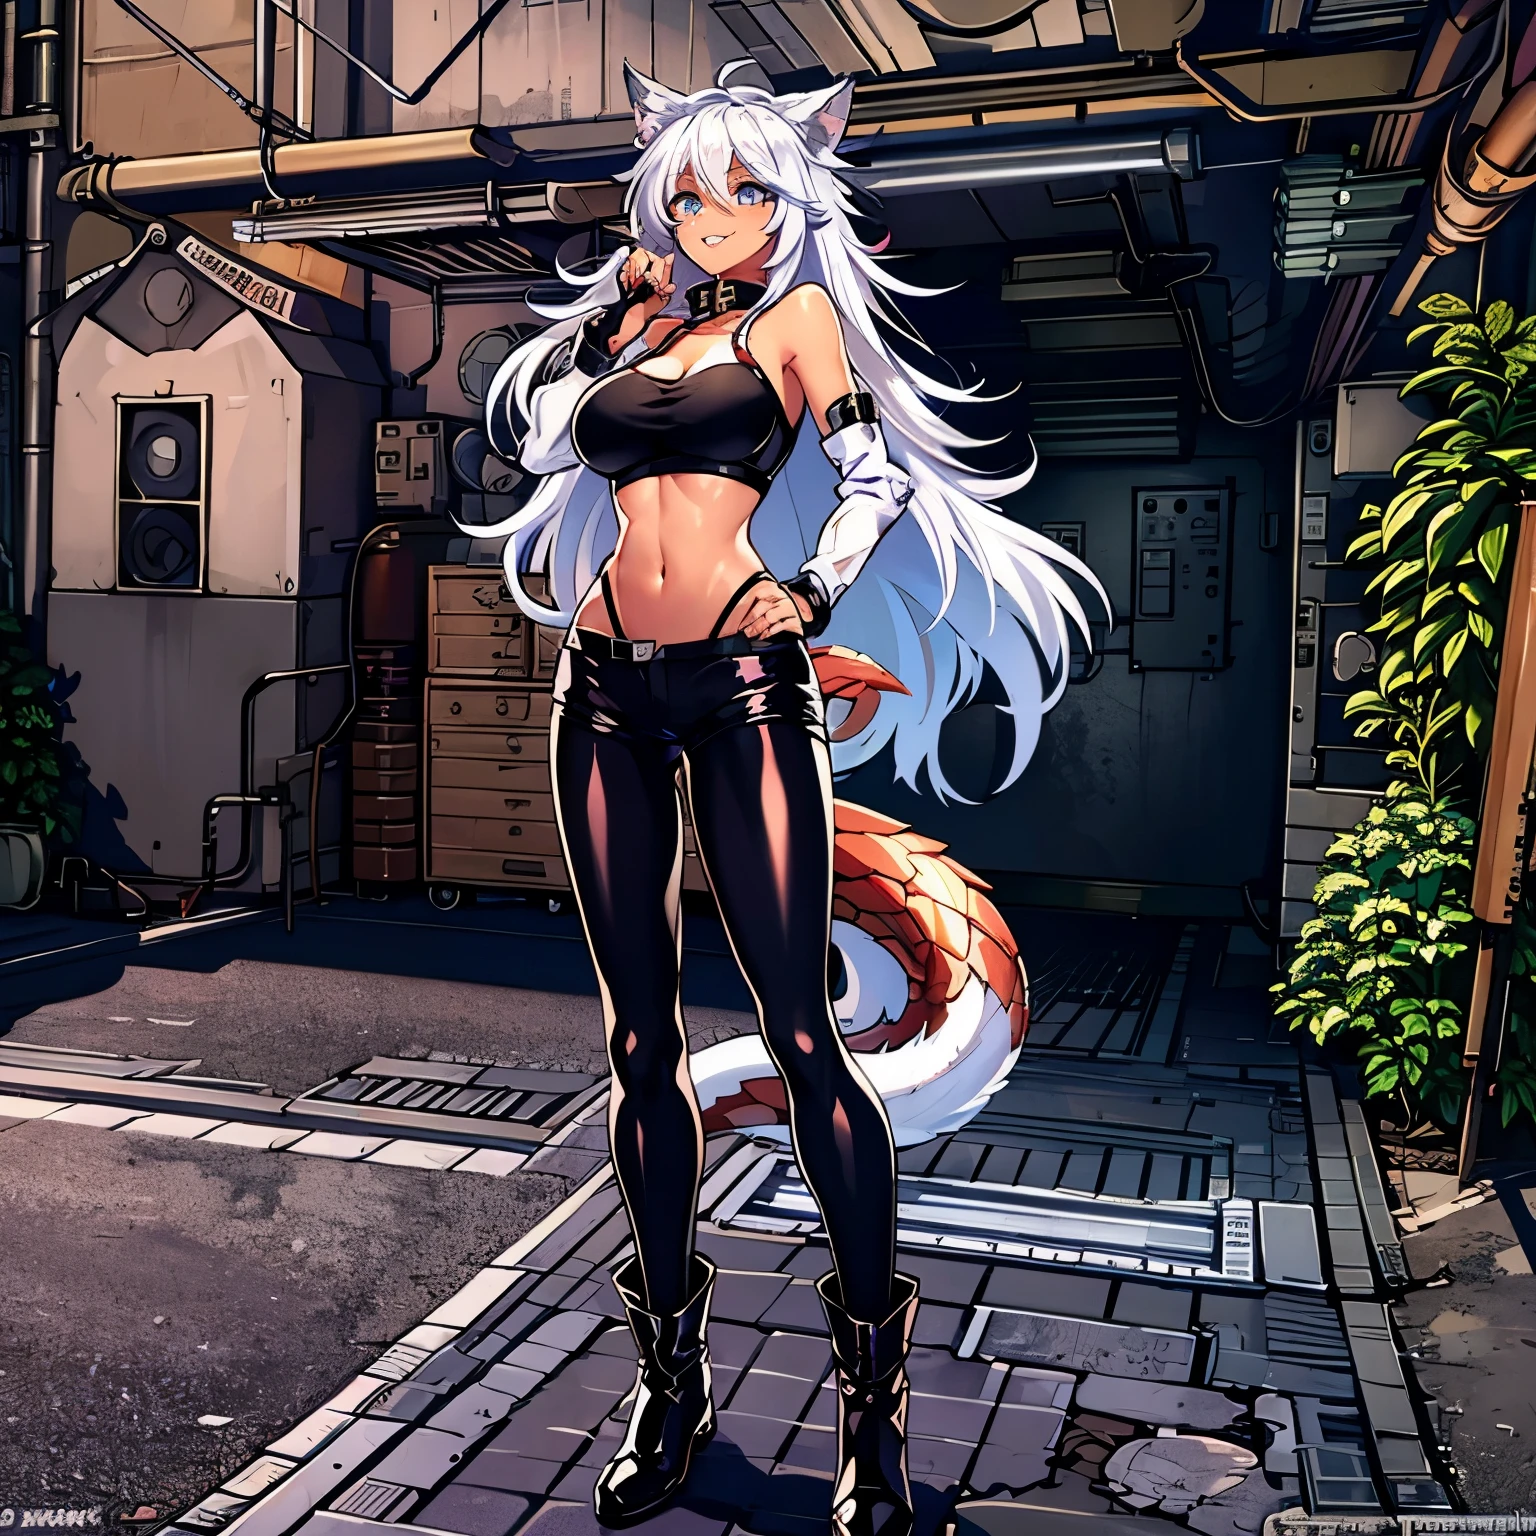 8k, resolution, high quality, high resolution, best quality, best resolution, absurd resolution, ray tracing, high detailed, masterpiece, shoulder length white hair, female,white wolf ears, teenage girl, slim body, white scale dragon tail,black combat boots,dark camo pants, black t-shirt, white jacket, medium size chest, detailed blue eyes, beautiful face,solo female,1 dragon tail